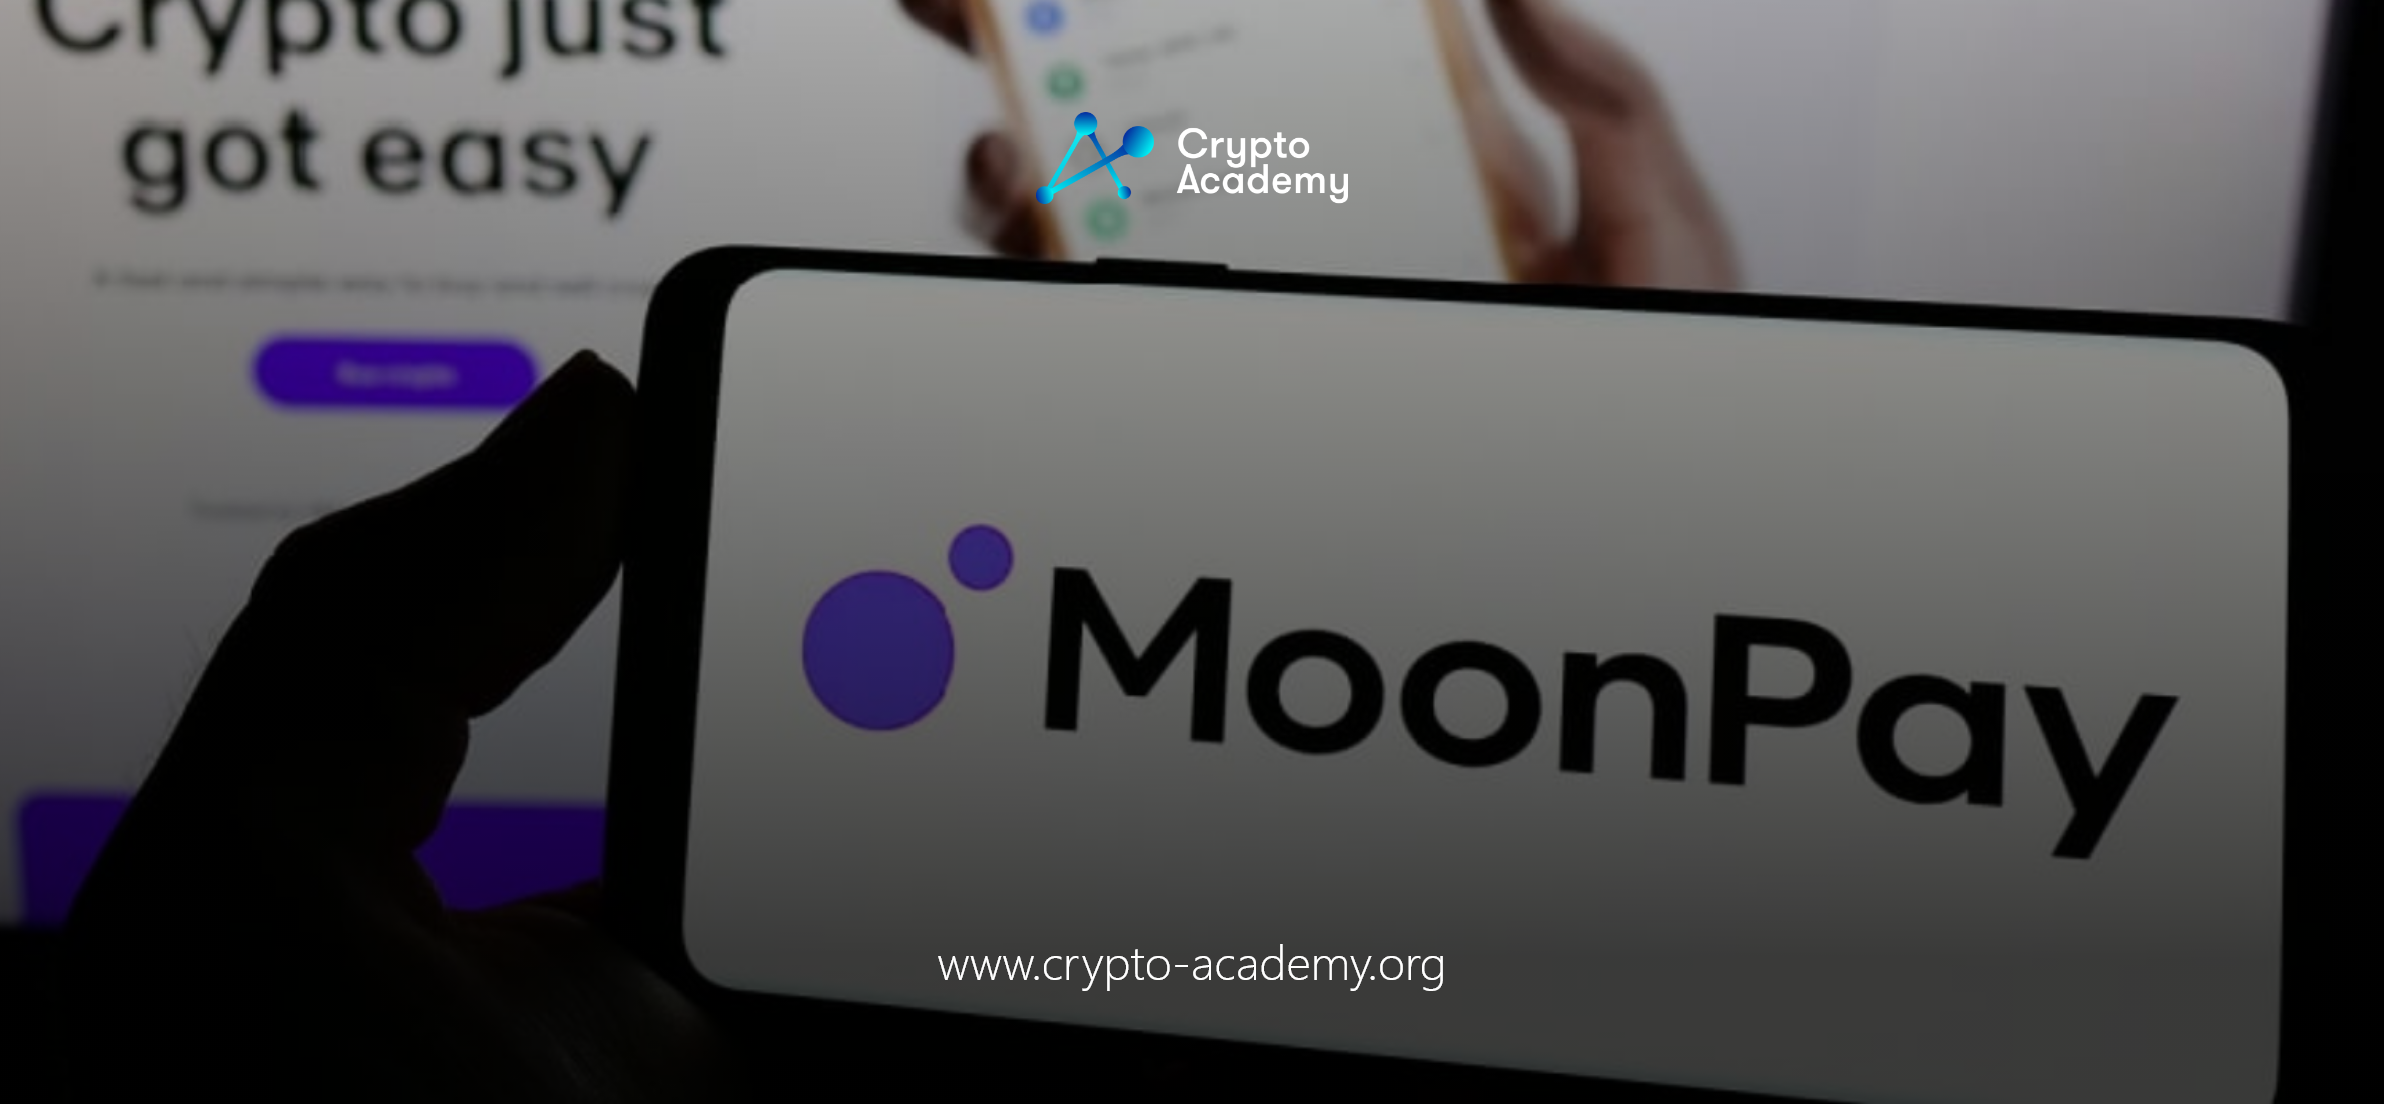 MoonPay, BitPay Team Up for Easy Crypto Transactions